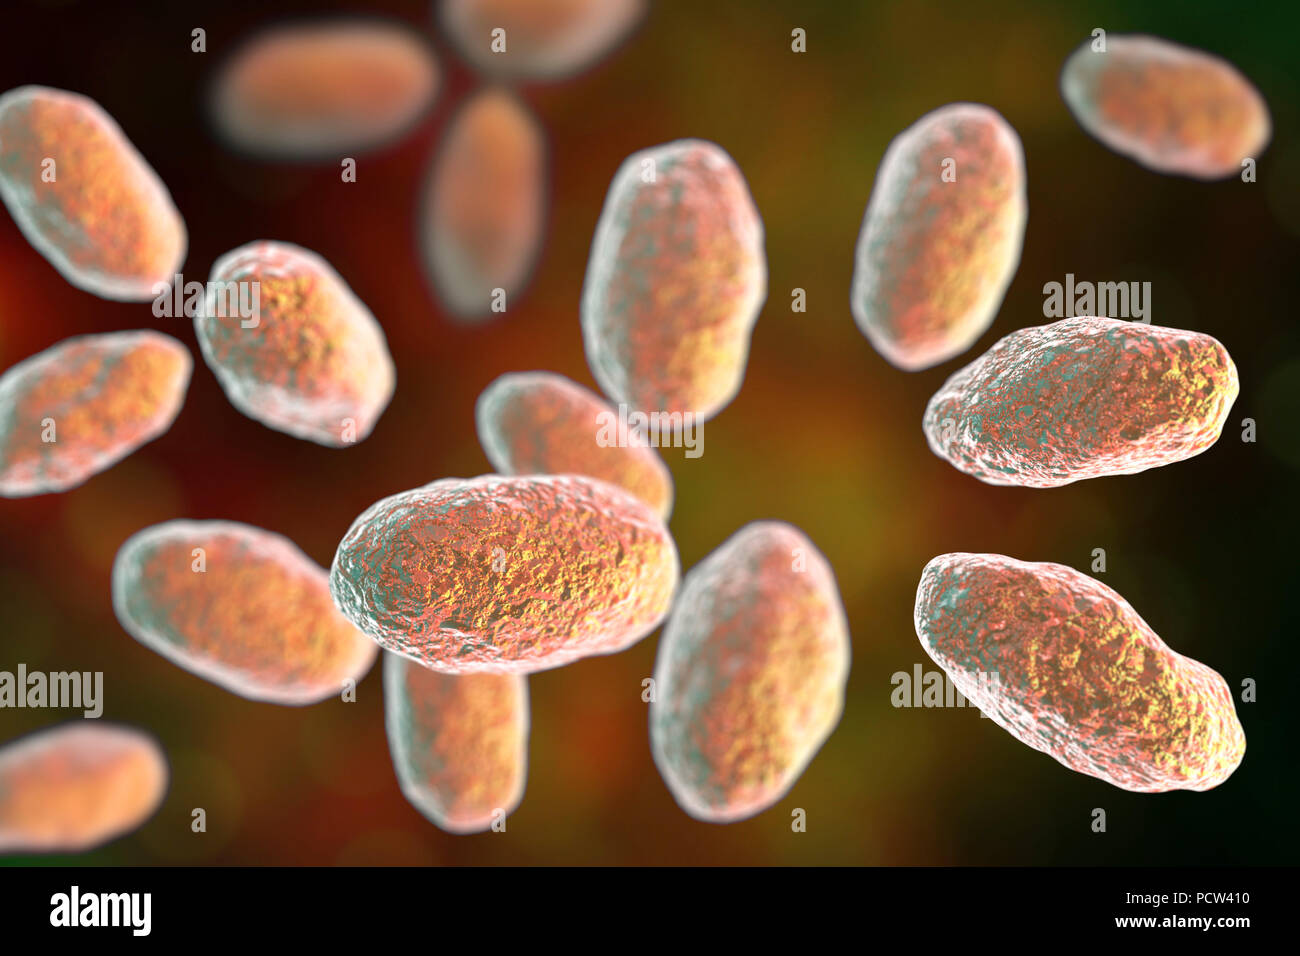 Computer illustration of the rod-shaped bacteria Yersinia pseudotuberculosis (Gram negative), an enterobacteria and the causative agent of Far East scarlet-like fever in humans. By symptoms it is similar to infection caused by Yersinia enterocolitica (fever and right-sided abdominal pain), but diarrhea is often absent. Stock Photo